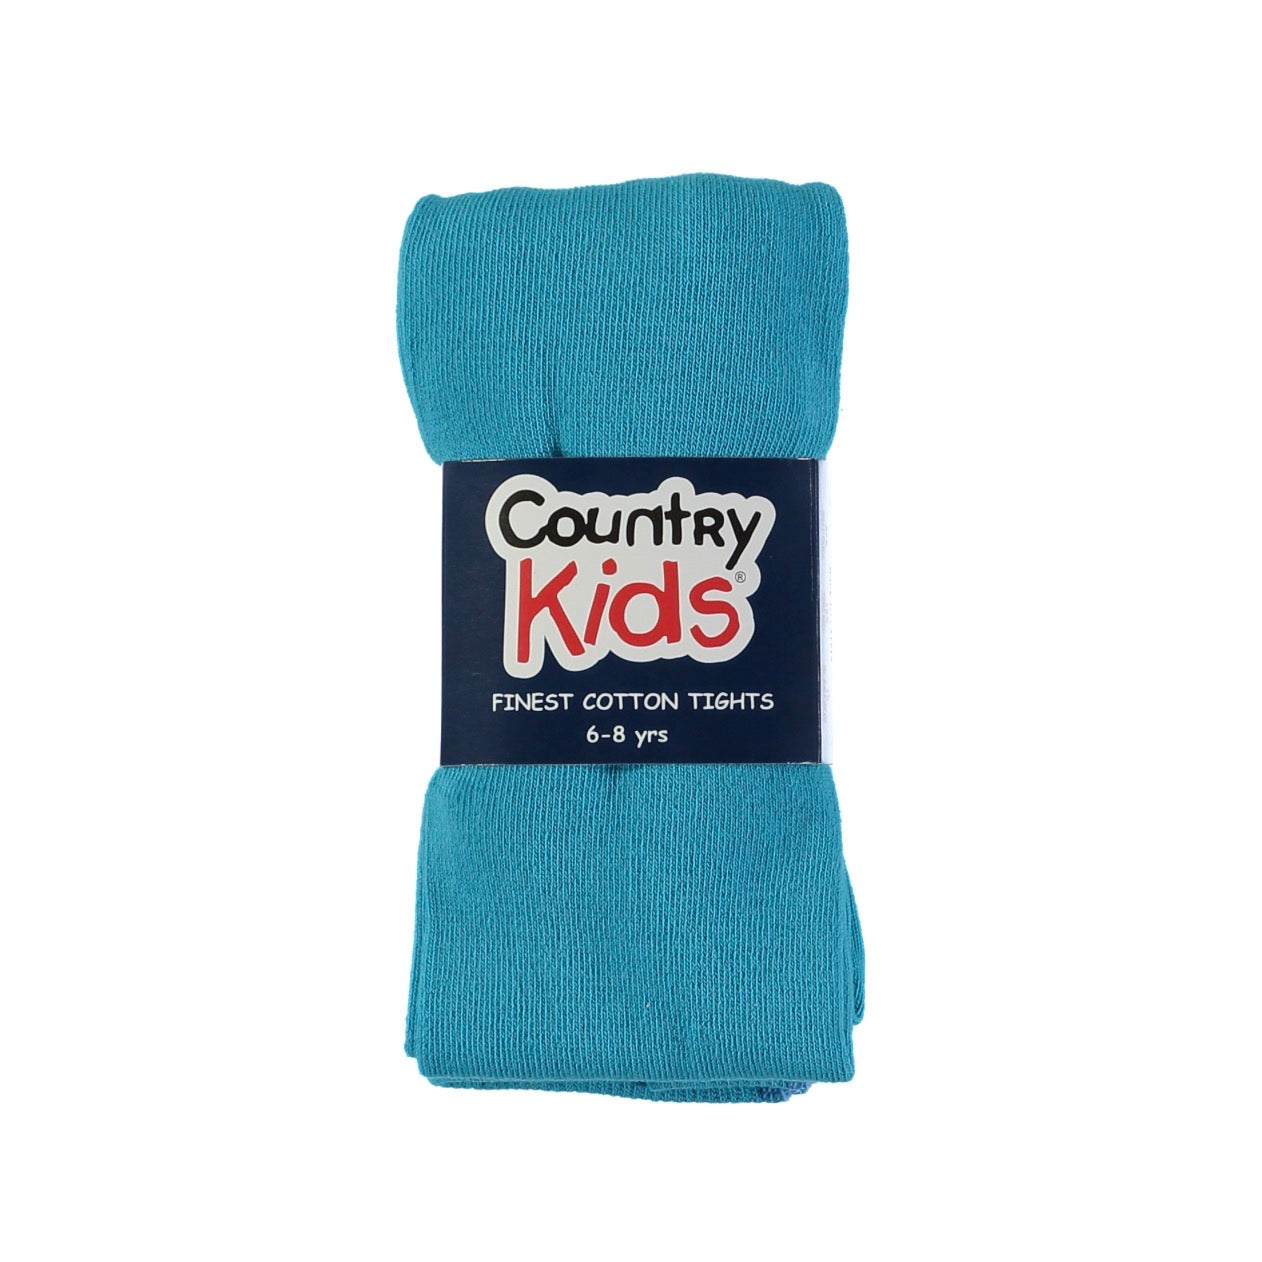 Country Kids Plain Tights Turquoise Clothing 1-3YRS / Turquoise,3-5YRS / Turquoise,6-8YRS / Turquoise,9-11YRS / Turquoise